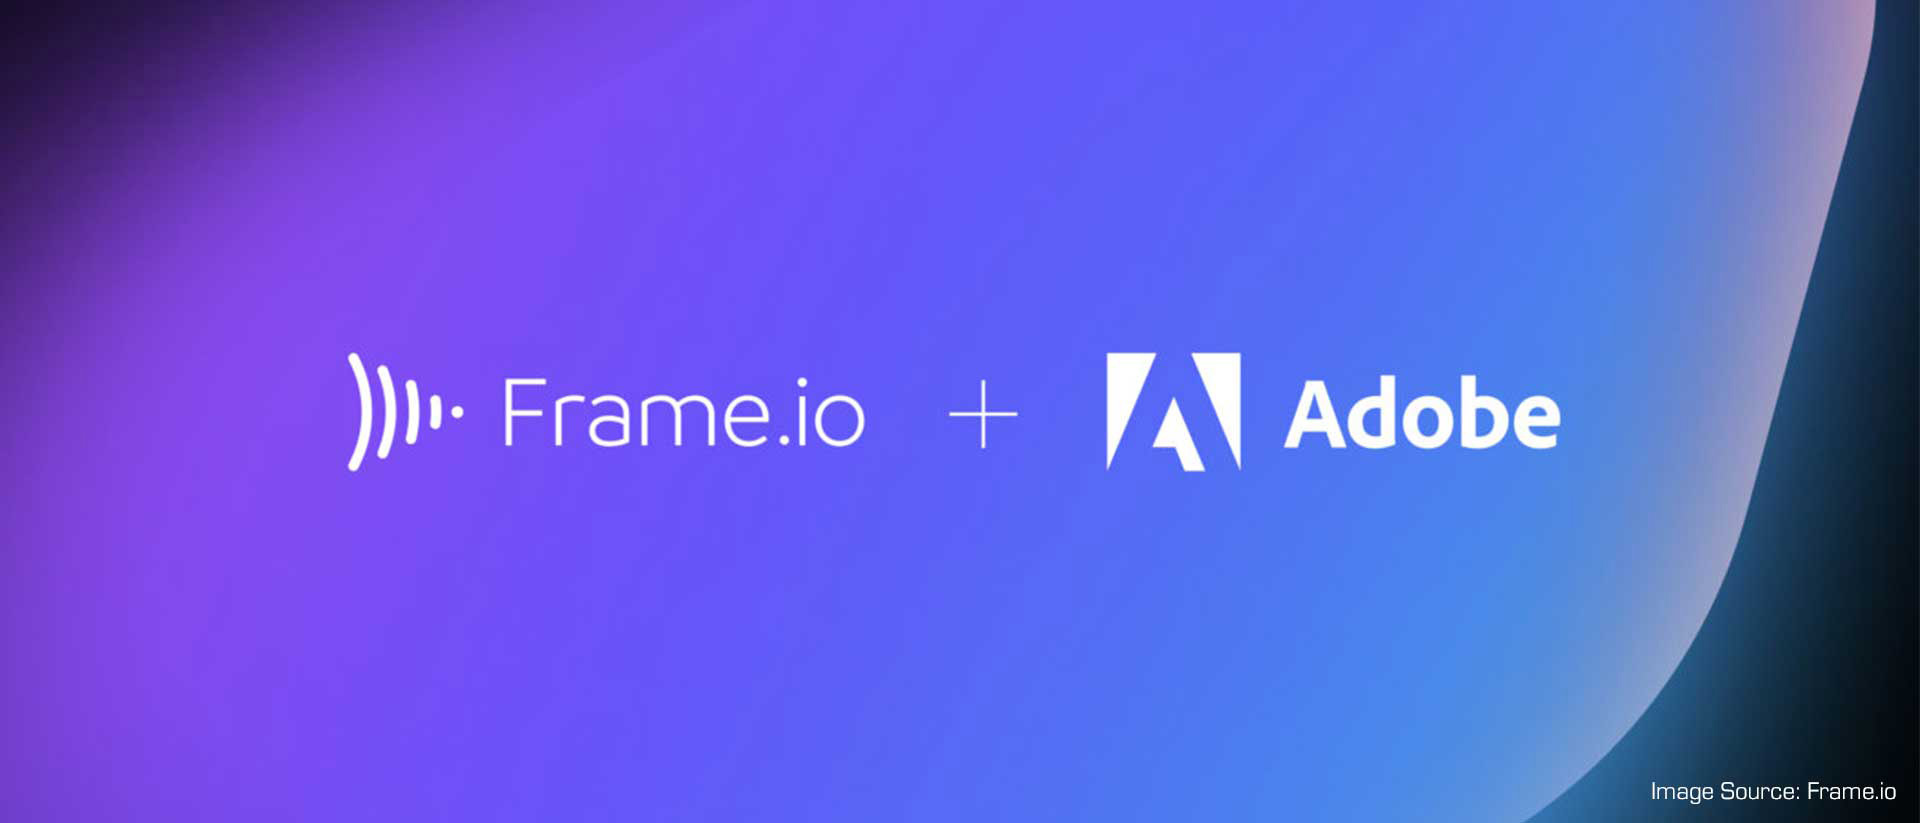 Adobe To Acquire Frame.io | Here's What That Means For Creative Cloud Users